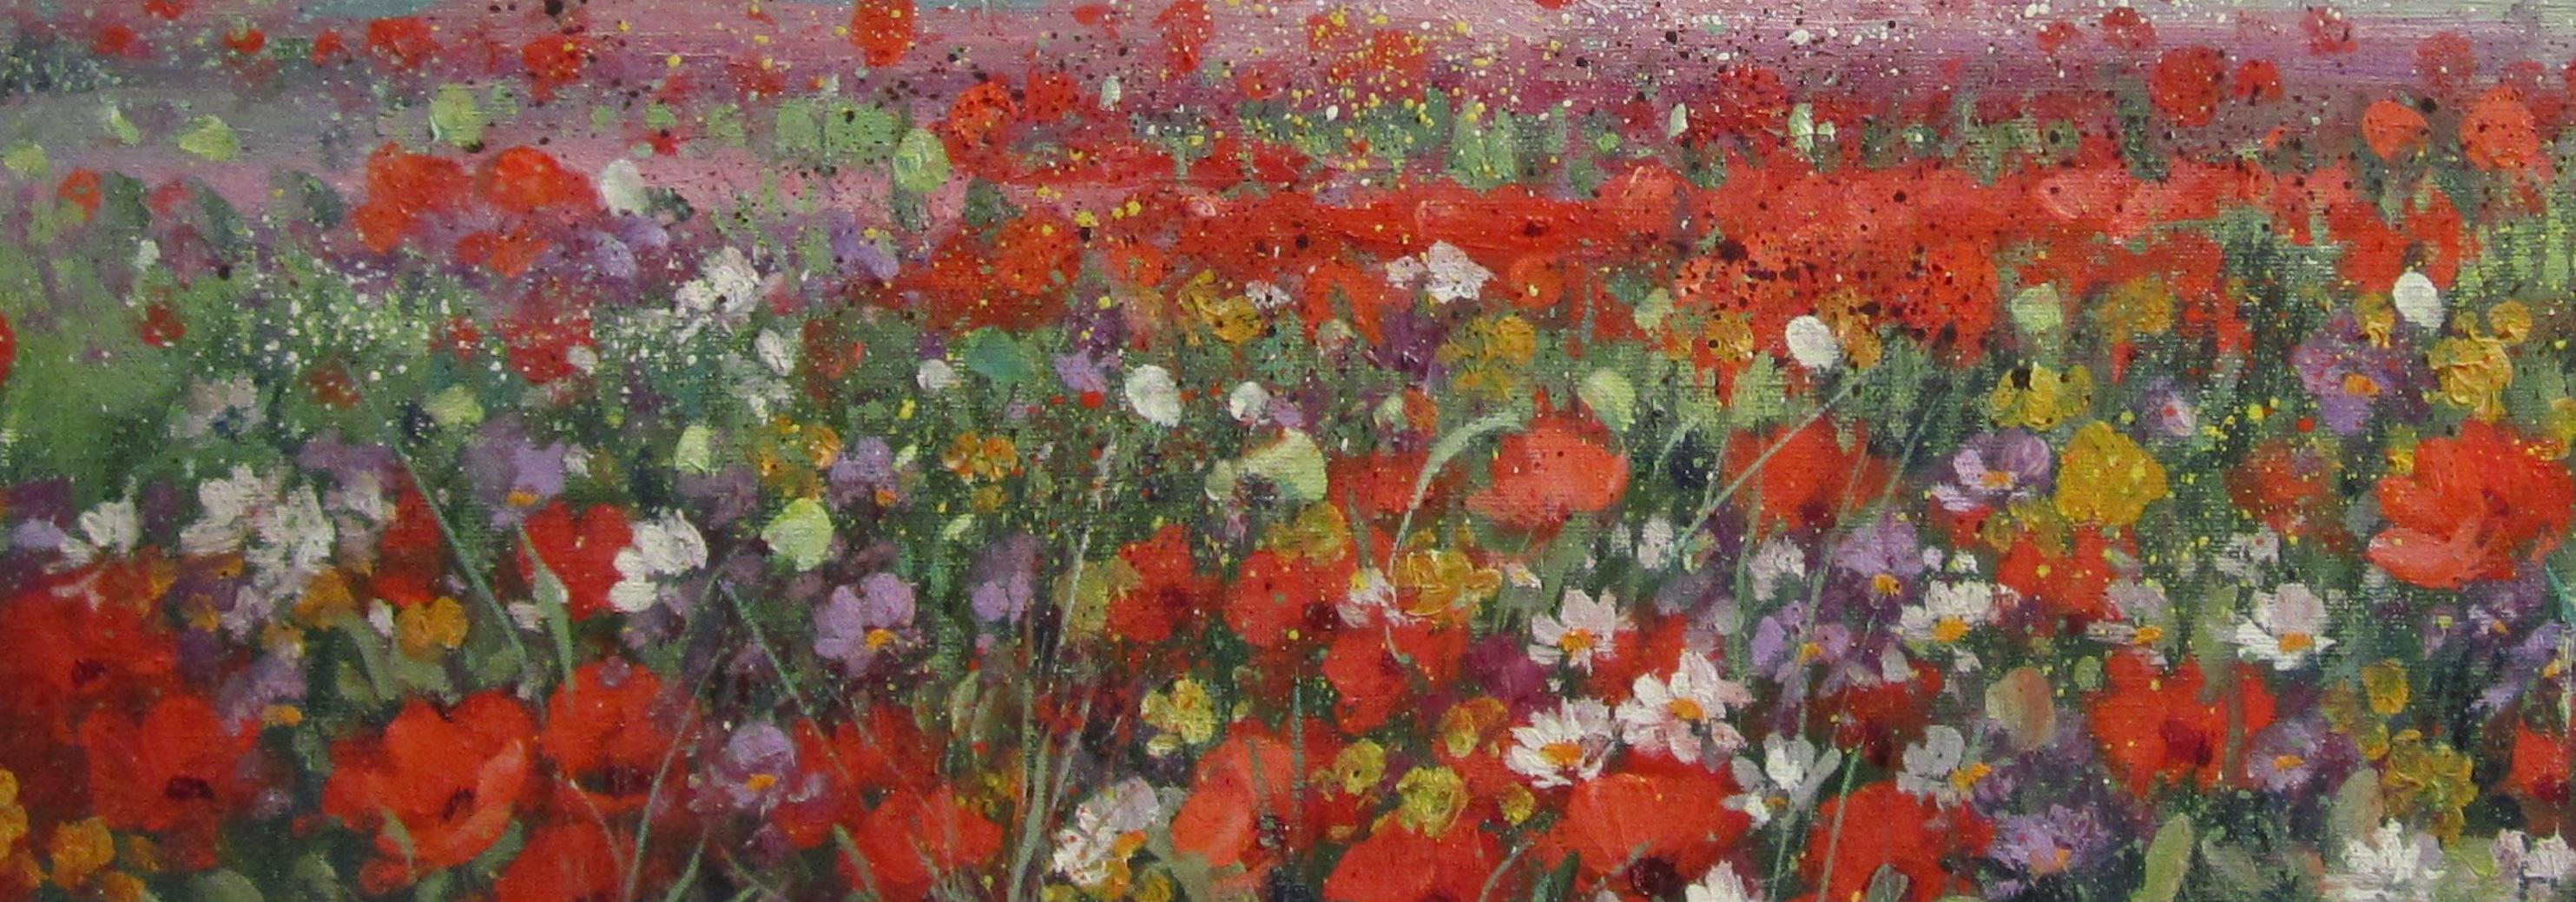 Contemporary Modern Flower Landscape 'Poppy Field' by Vincent Paya is a fun, playful and beautiful landscape.

Vincent Payá was born in Alicante, Spain in 1948. He began to paint as a child and he started his artistic career at the Fine Art School,